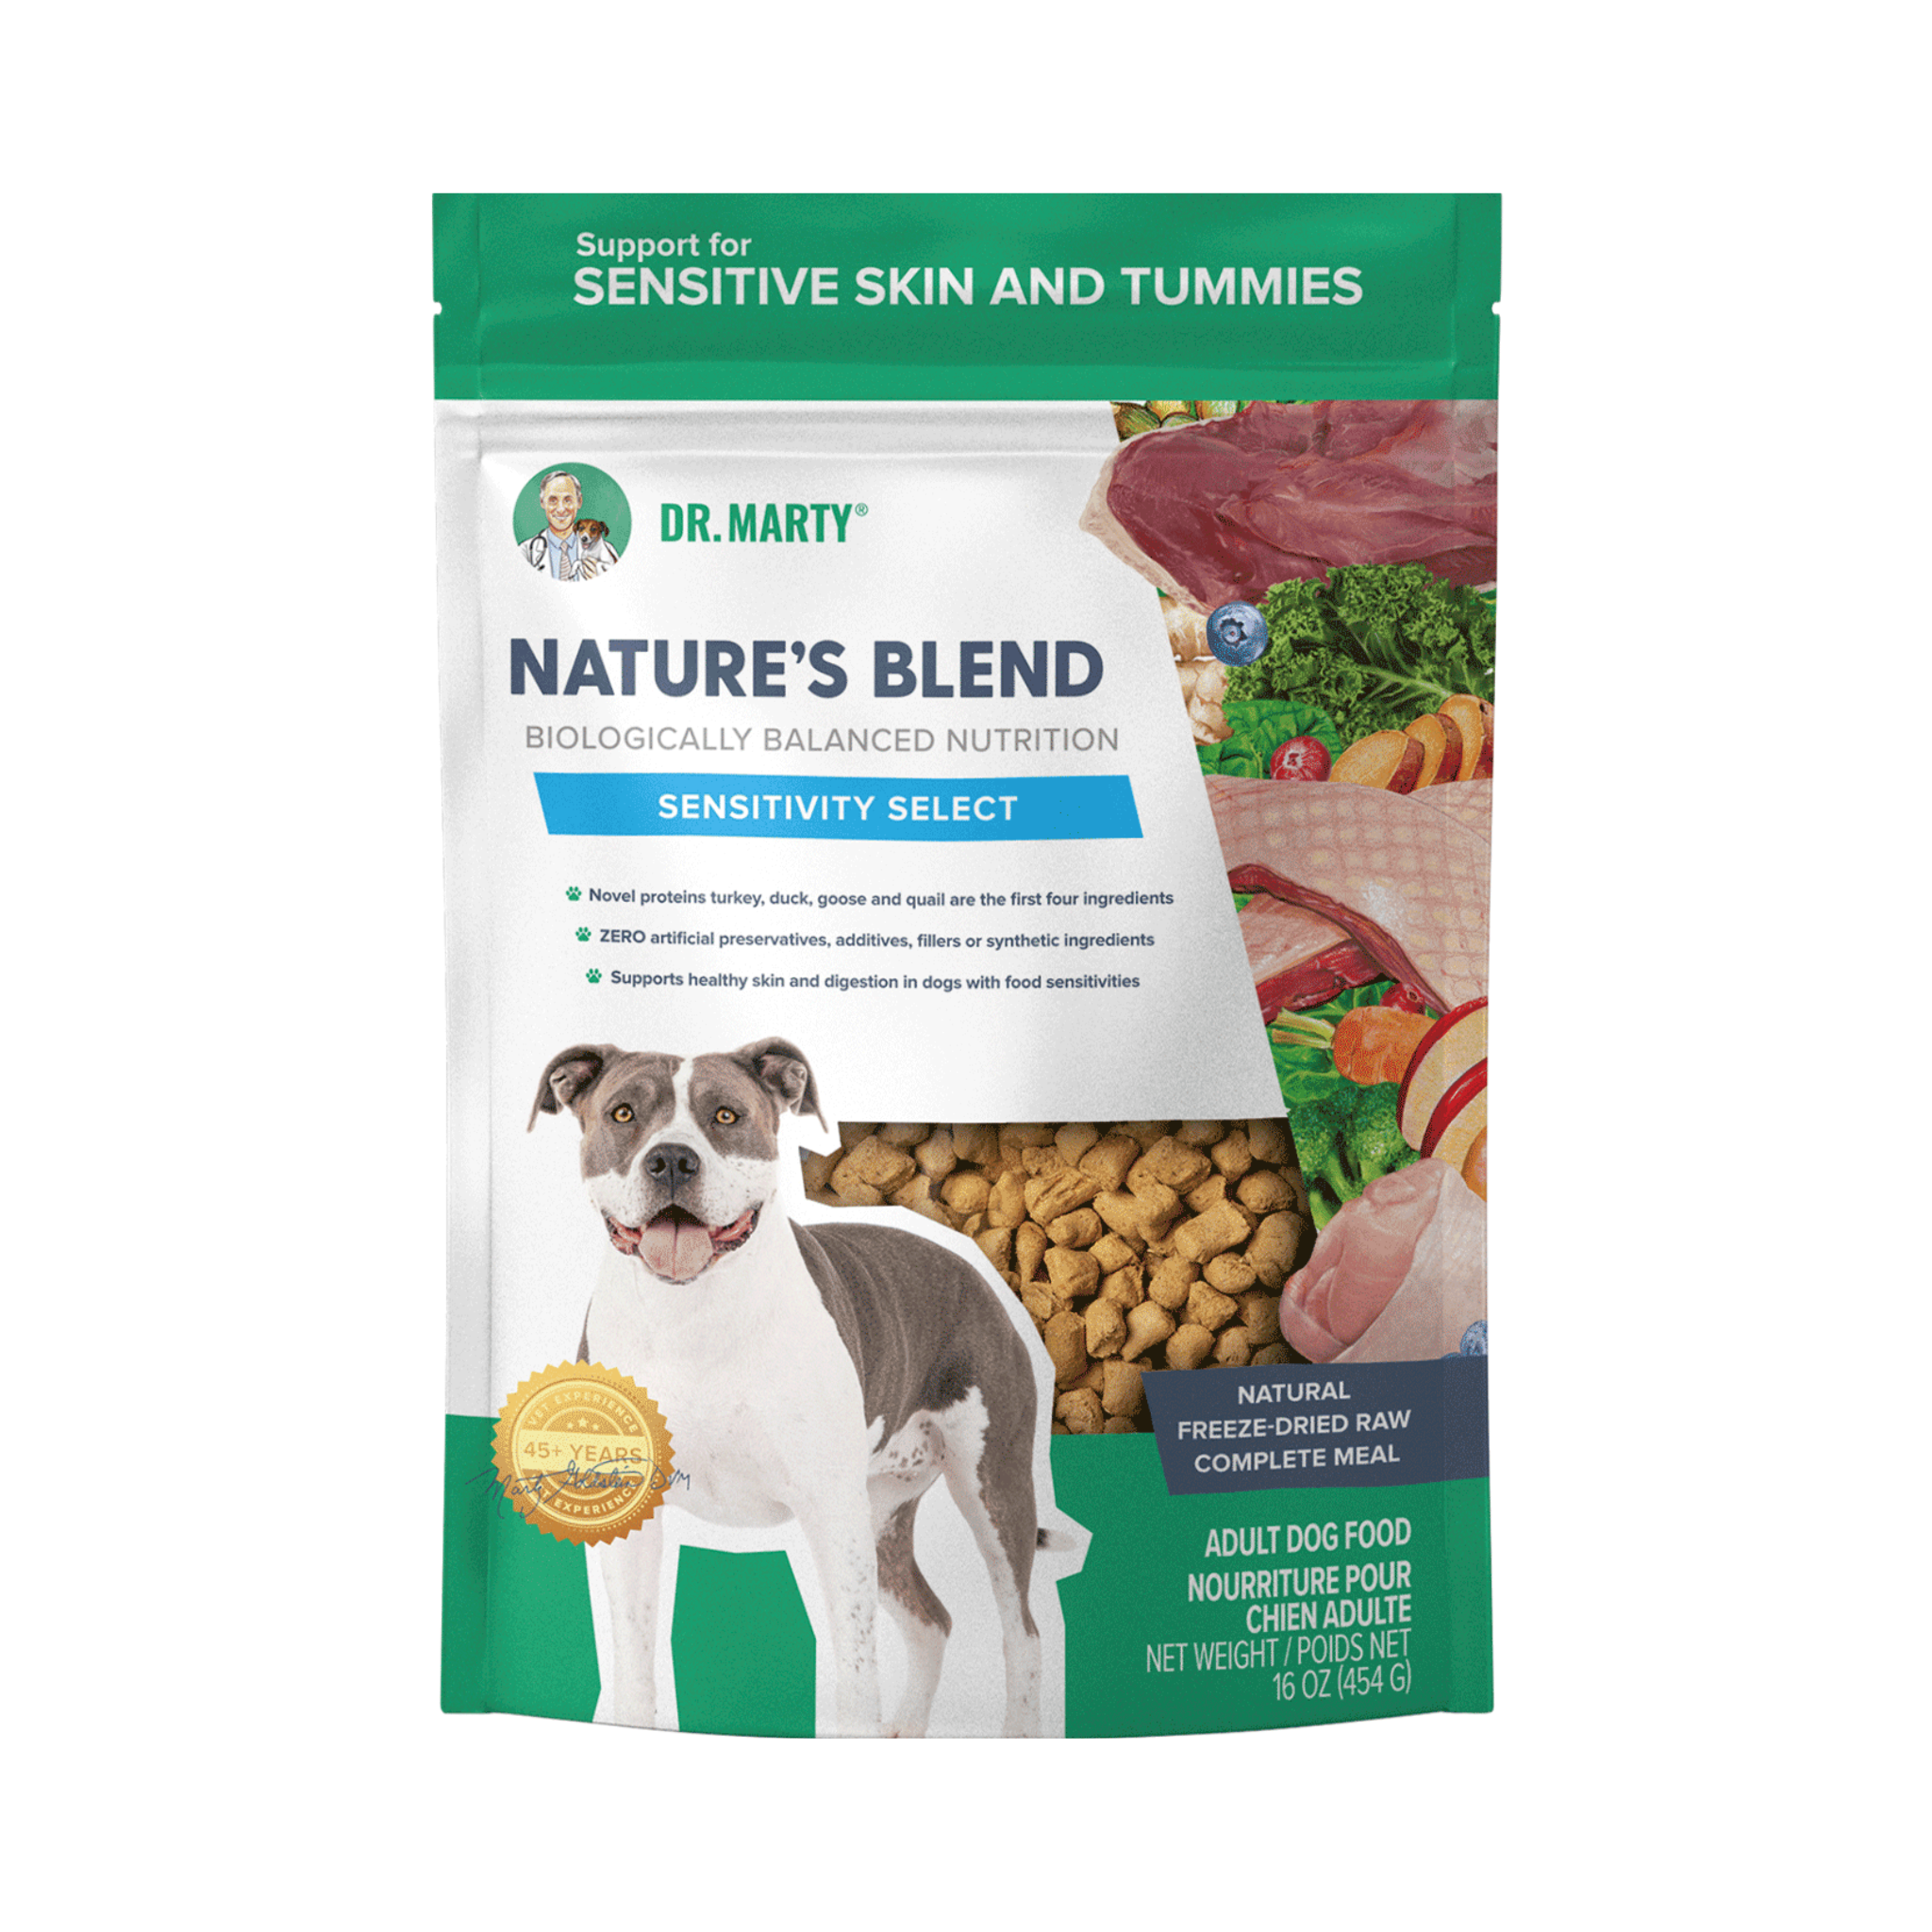 Dr. Marty's Nature's Blend Sensitivity Select Freeze Dried Dog Food